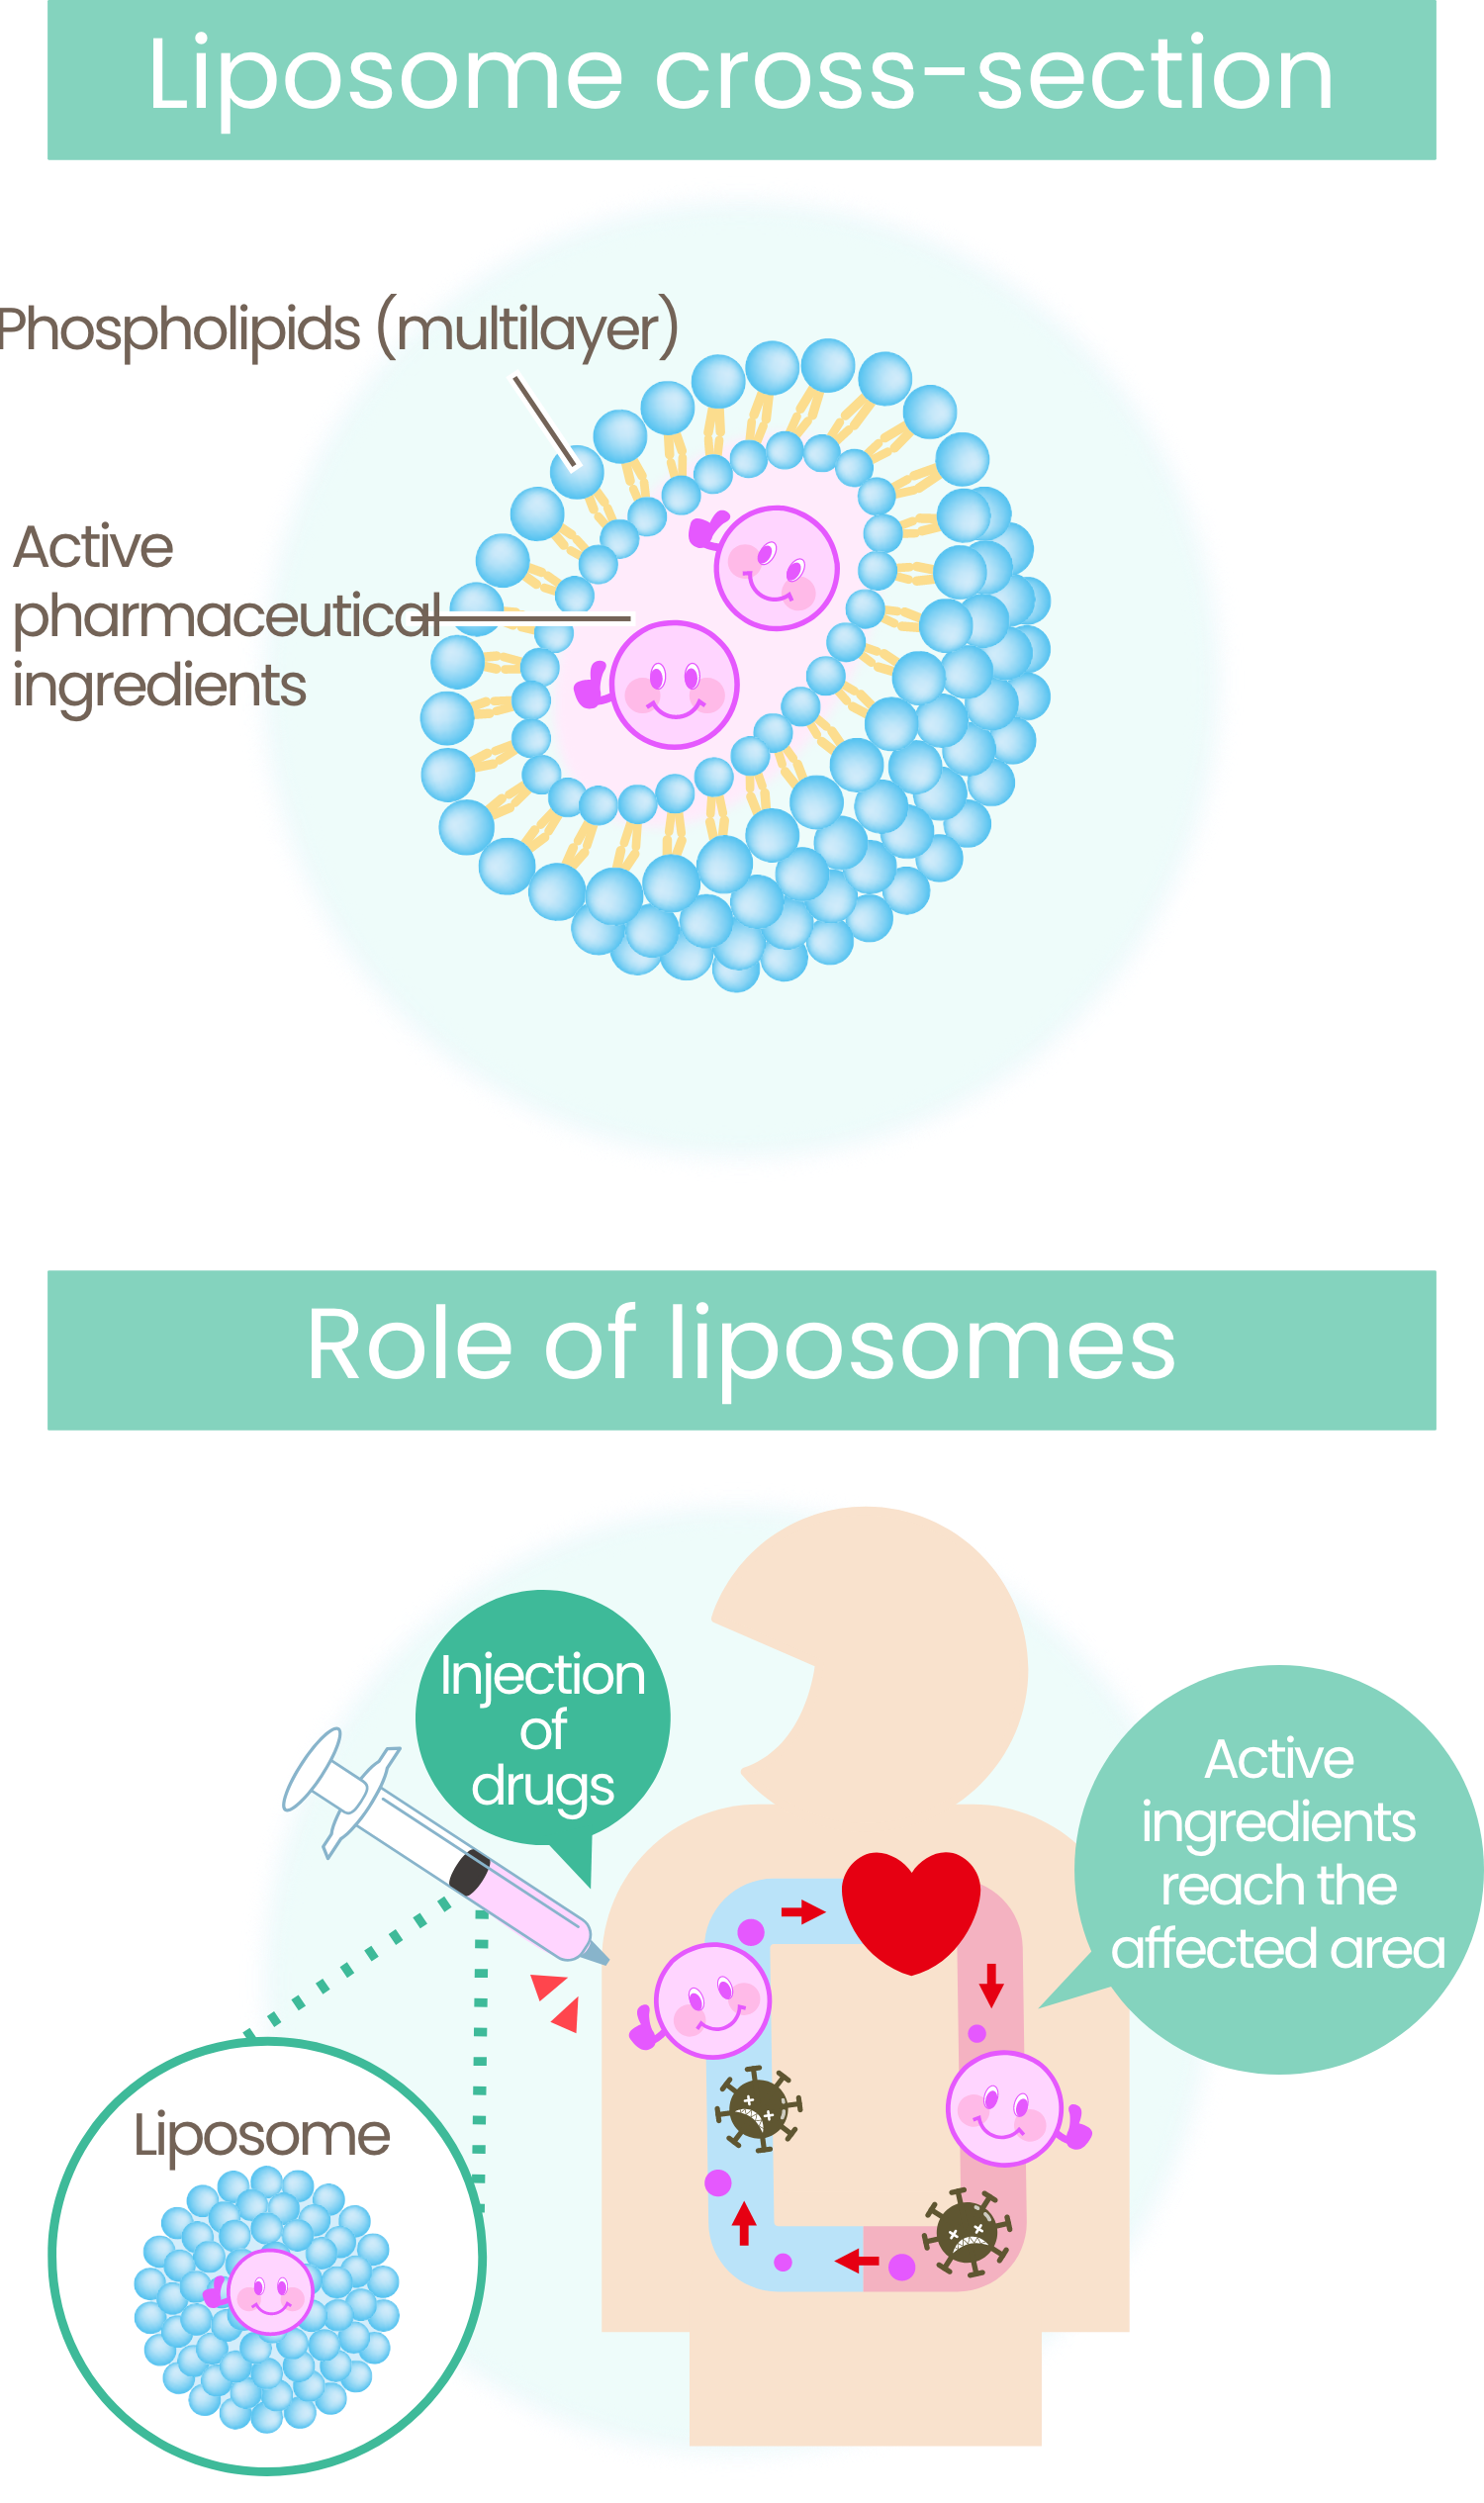 Cross-sectional view and The role of liposomes